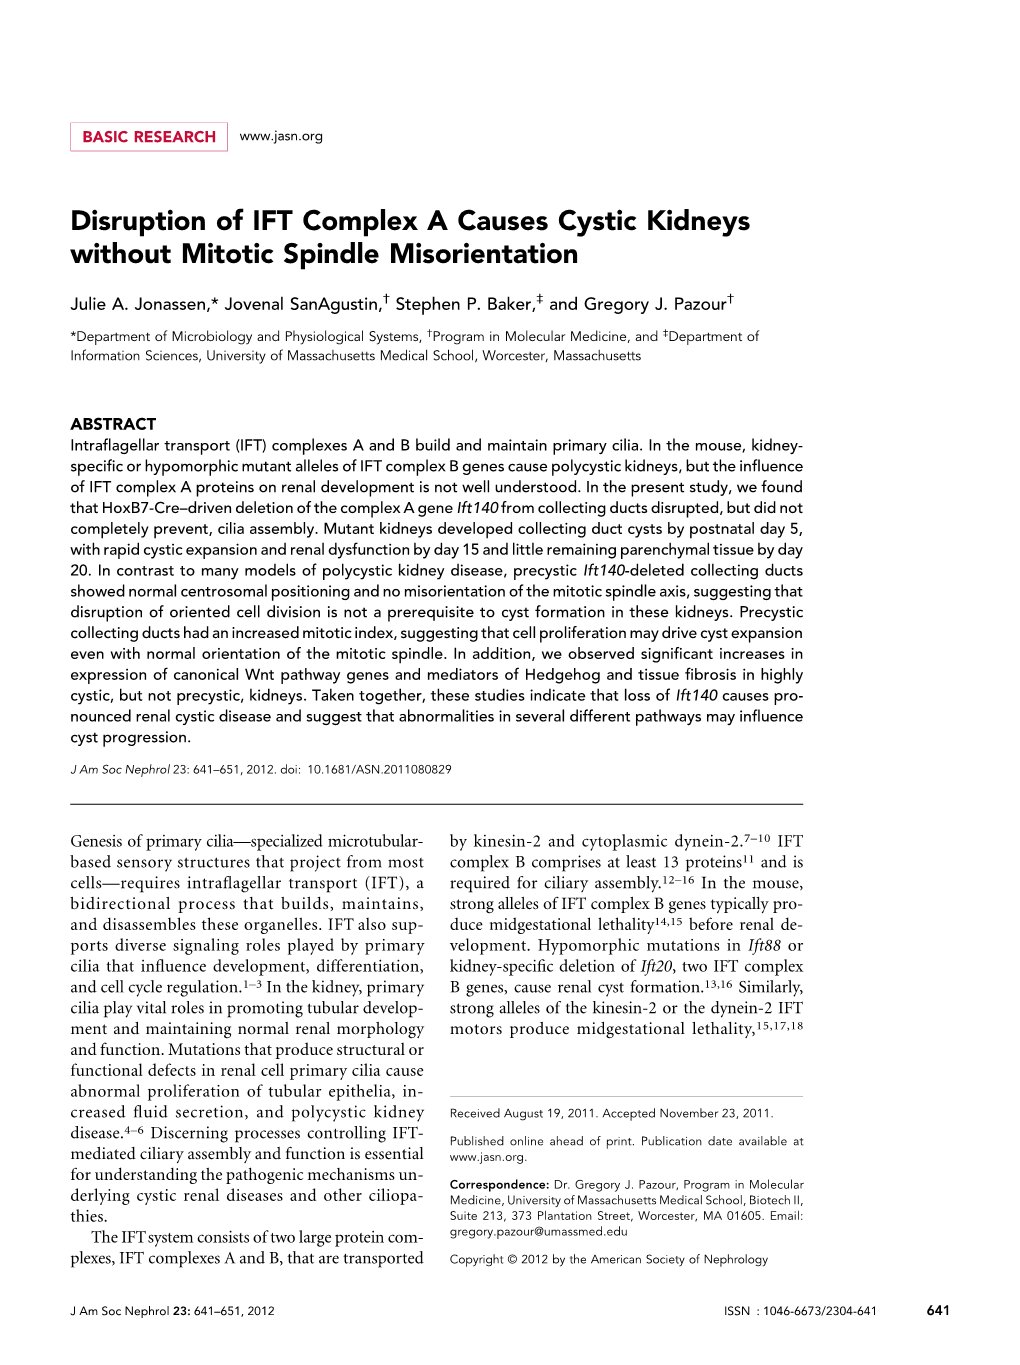 Disruption of IFT Complex a Causes Cystic Kidneys Without Mitotic Spindle Misorientation